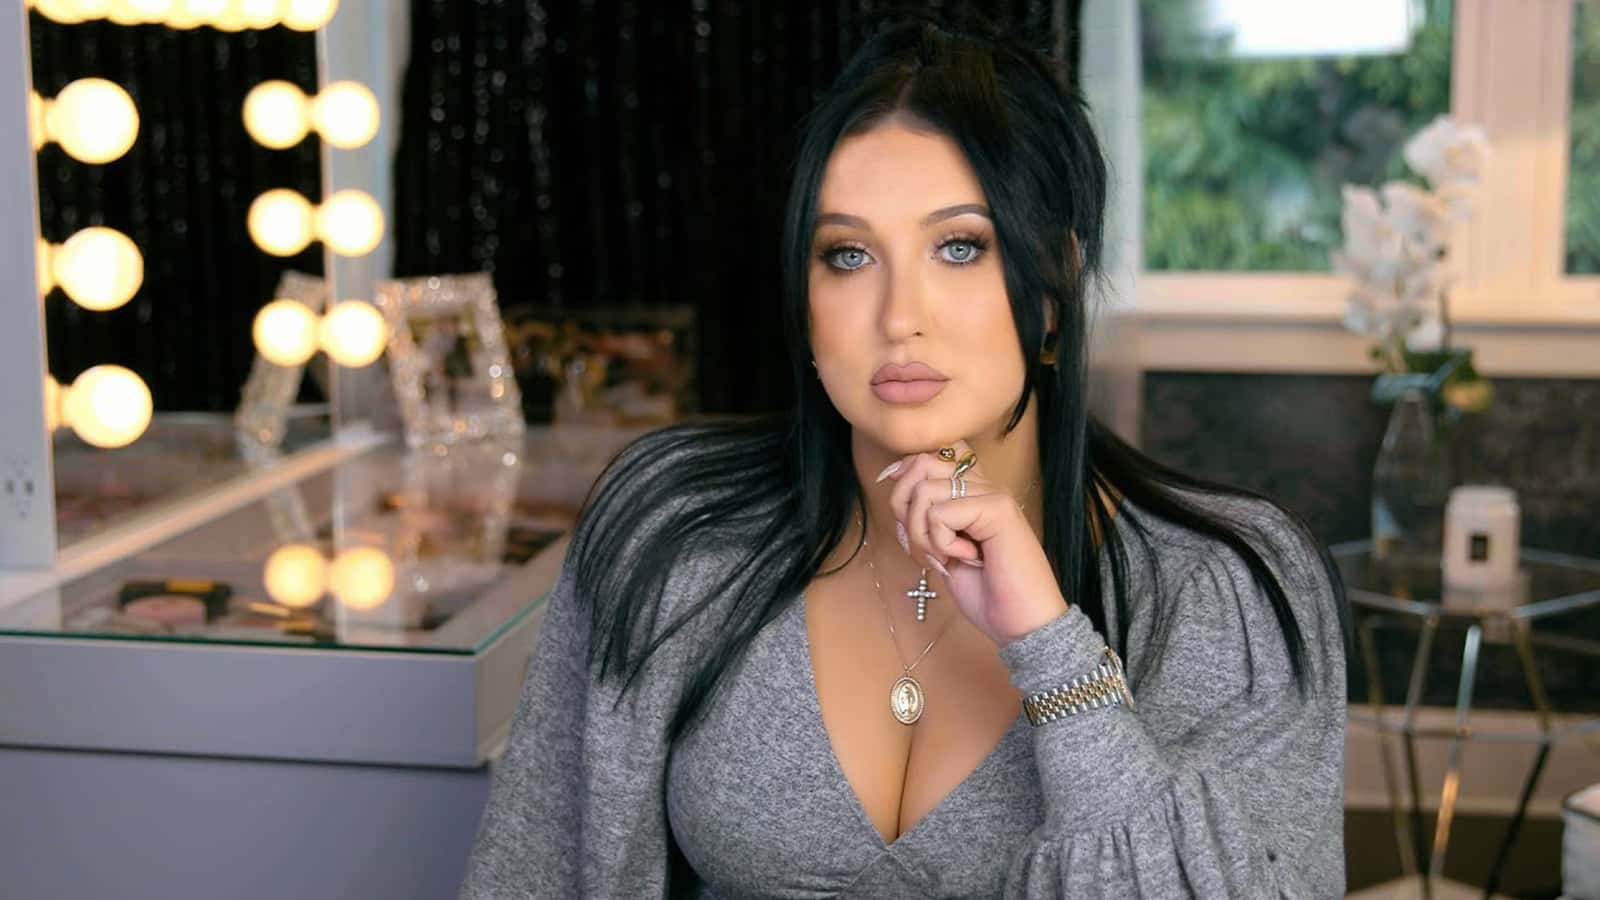 Does Jaclyn Hill Only Upload  Videos When She Has Something to Sell?  Fans Sound Off